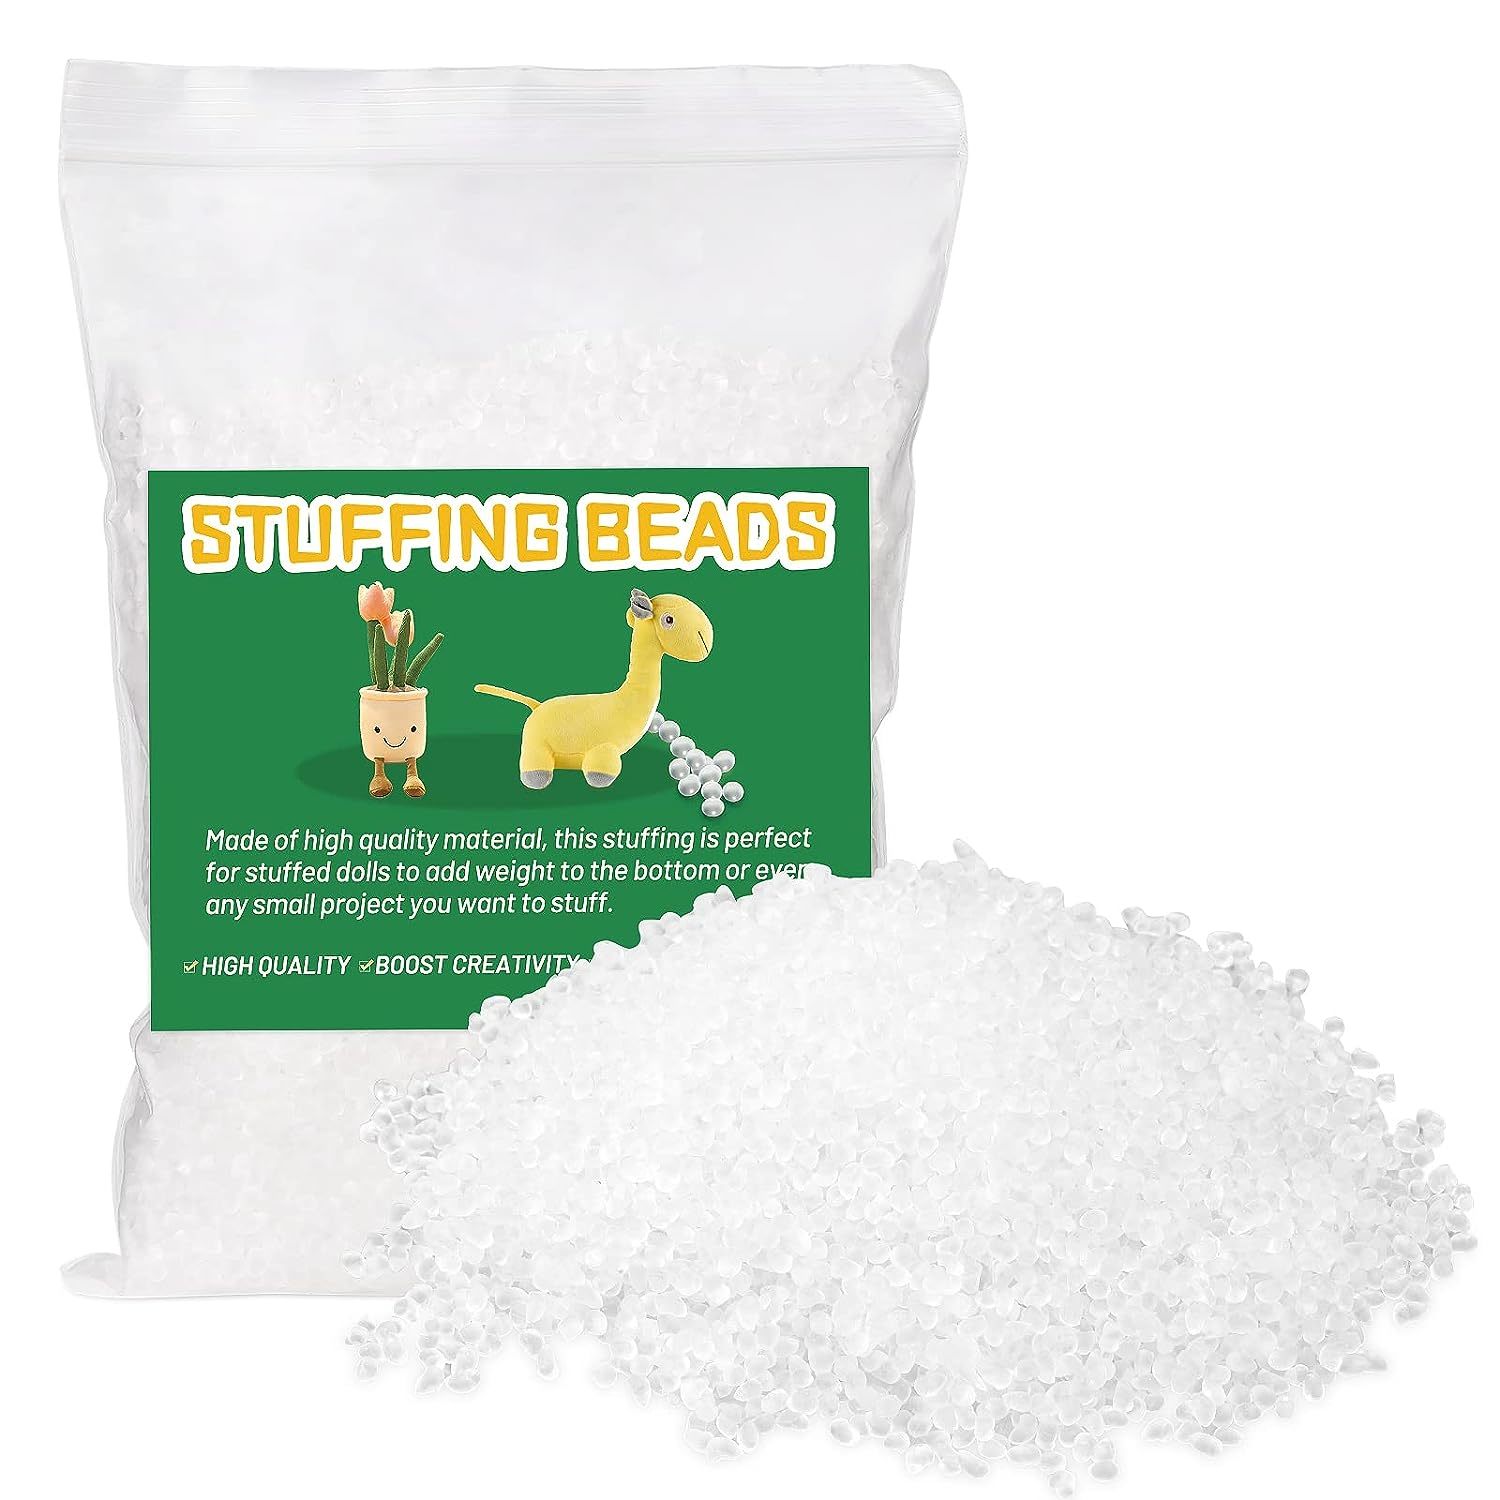 Primary image for 250G/8.81Oz Stuffing Beads, Craft Stuffing Beads For Stuffed Animals, Bean Bag F